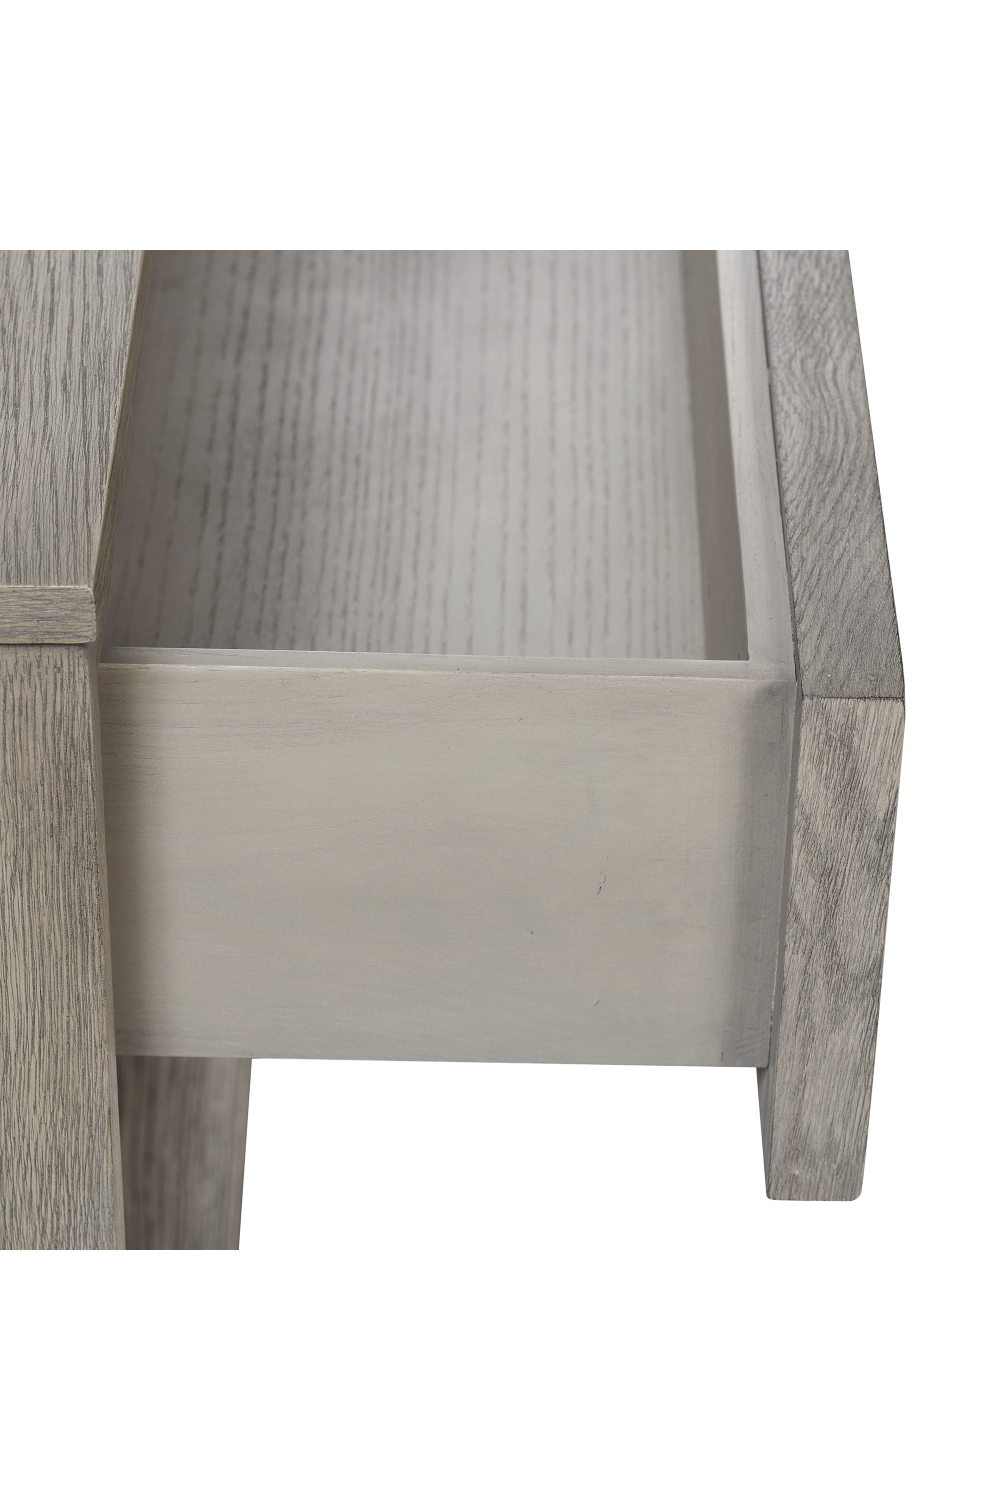 Taupe Oak One Drawer Nightstand | Andrew Martin Claiborne | OROA